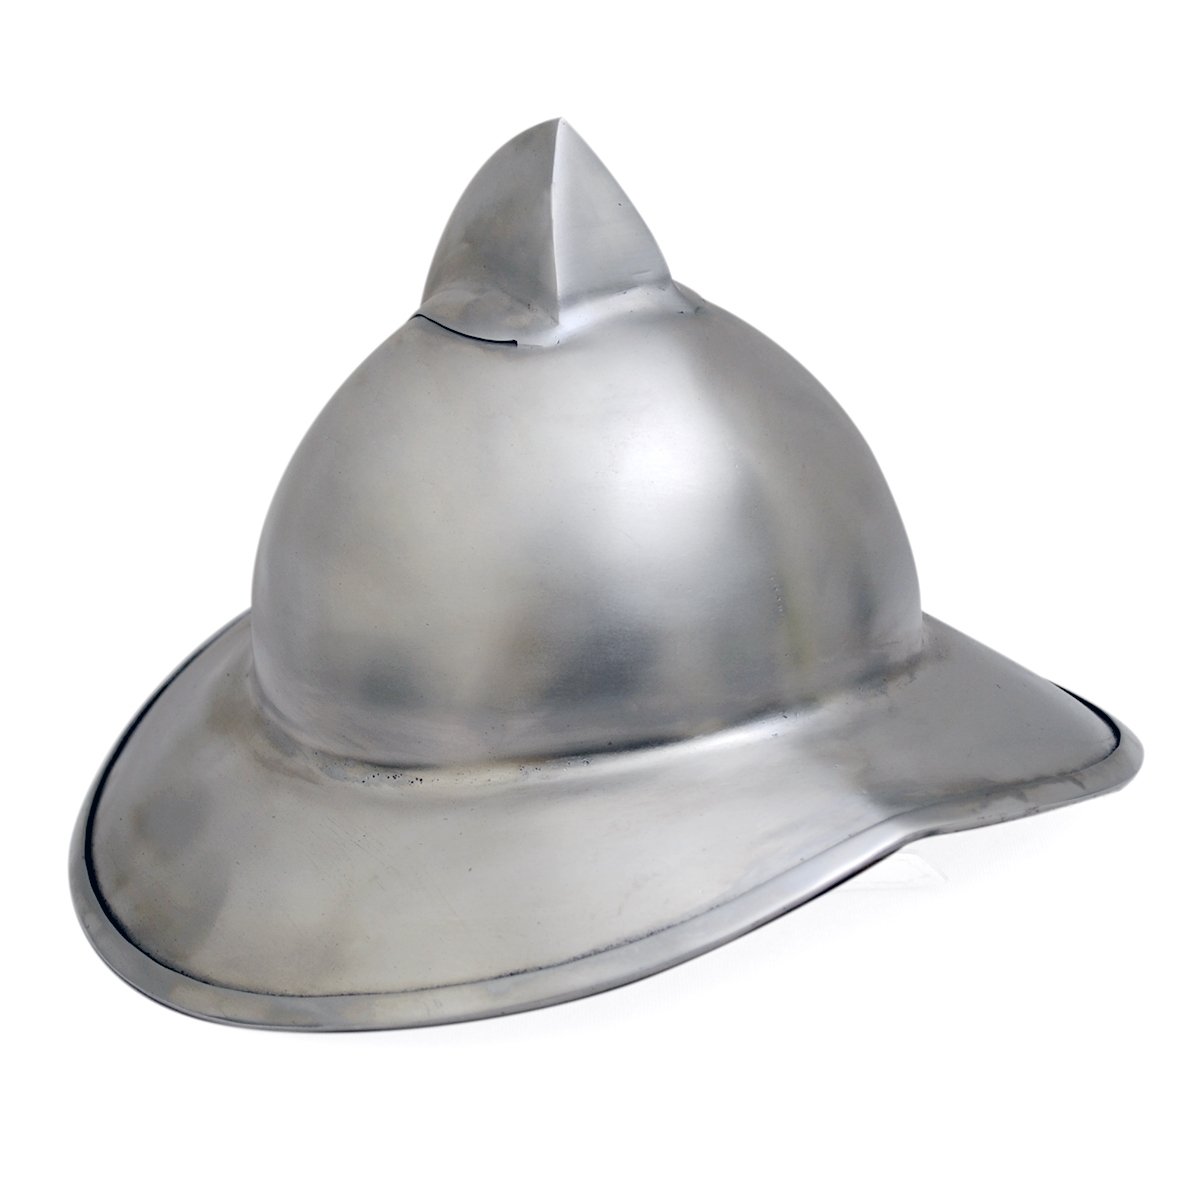 Early Kettle Hat from maciejowski Bible - C. 1250, Size M